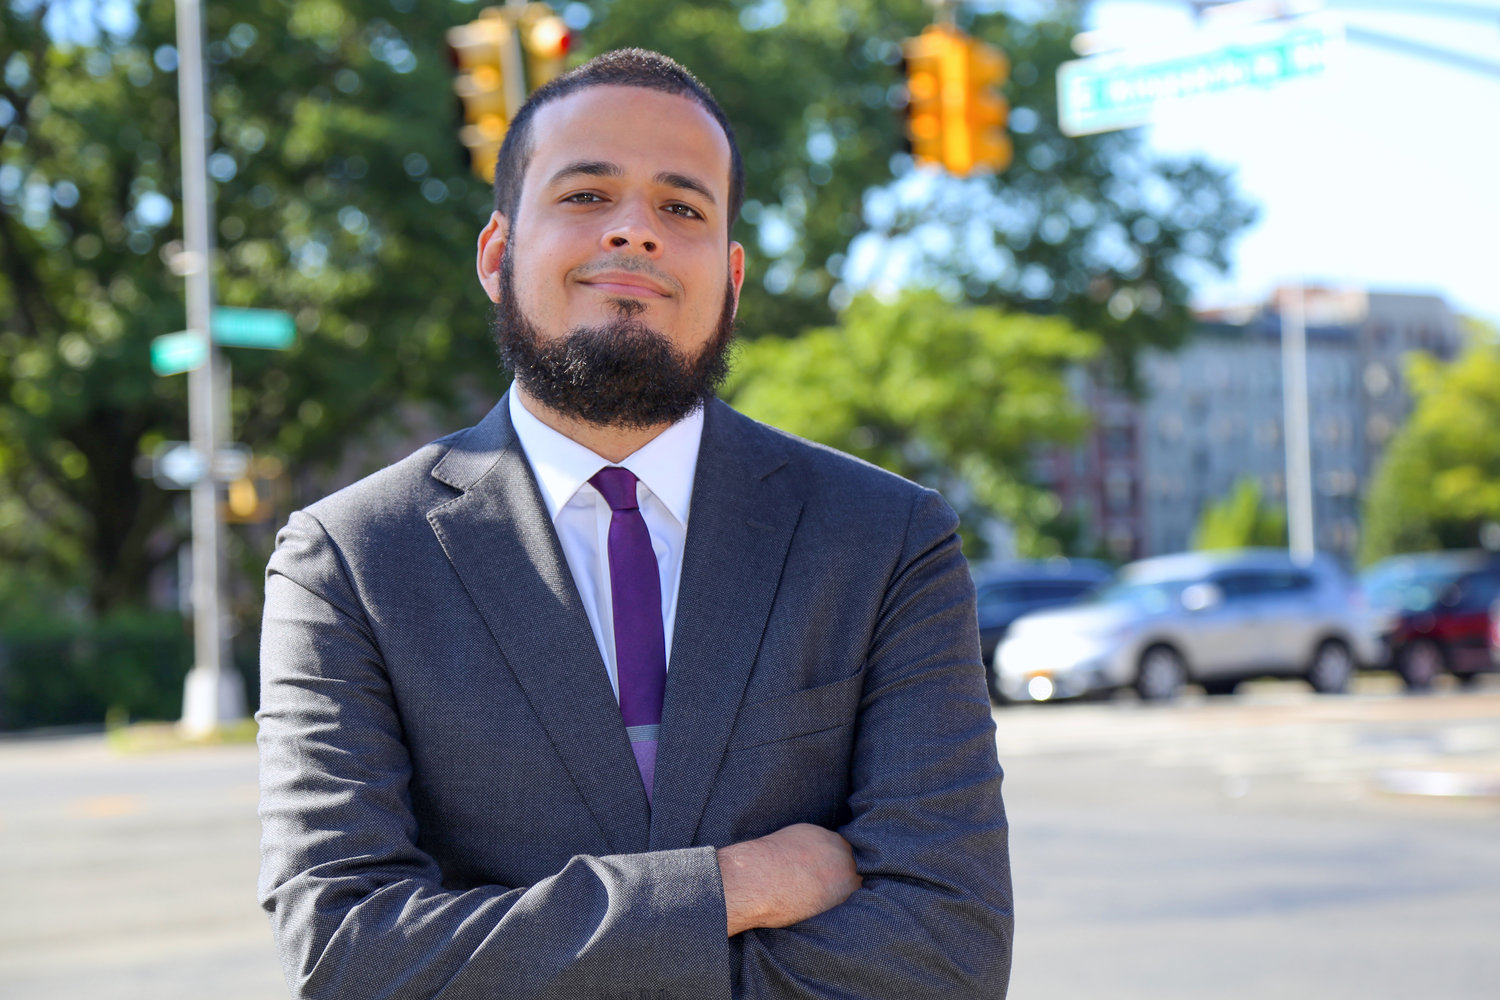 After a lifetime of organizing with the Northwest Bronx Community and Clergy Coalition, Adolfo Abreu is ready to step into city politics, launching his campaign to claim Fernando Cabrera’s seat in next year’s city council election.